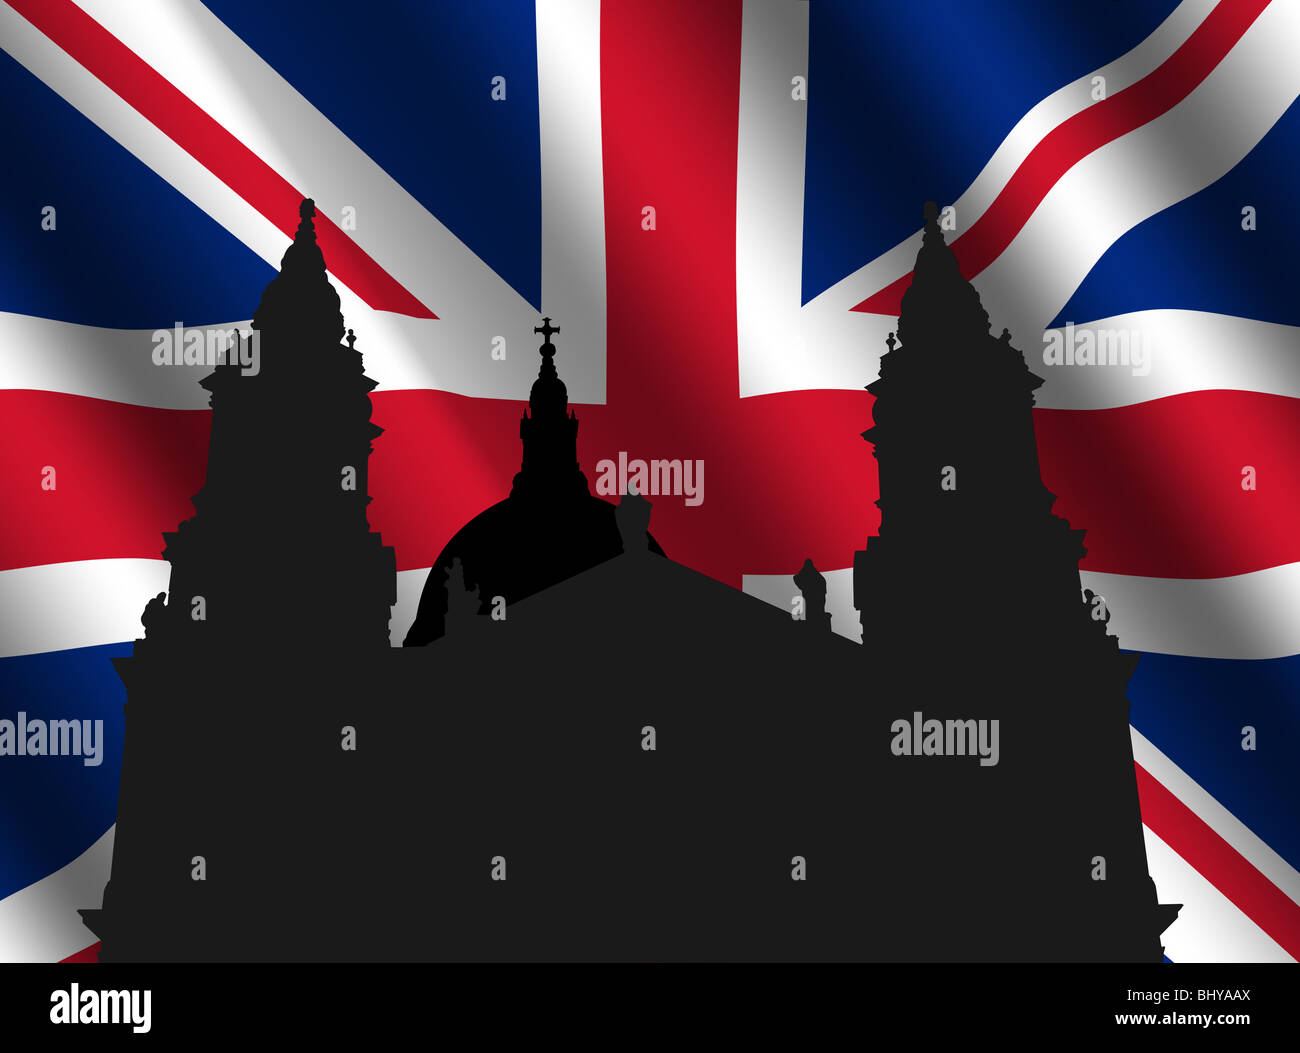 St Paul's cathedral London with rippled British flag illustration Stock Photo